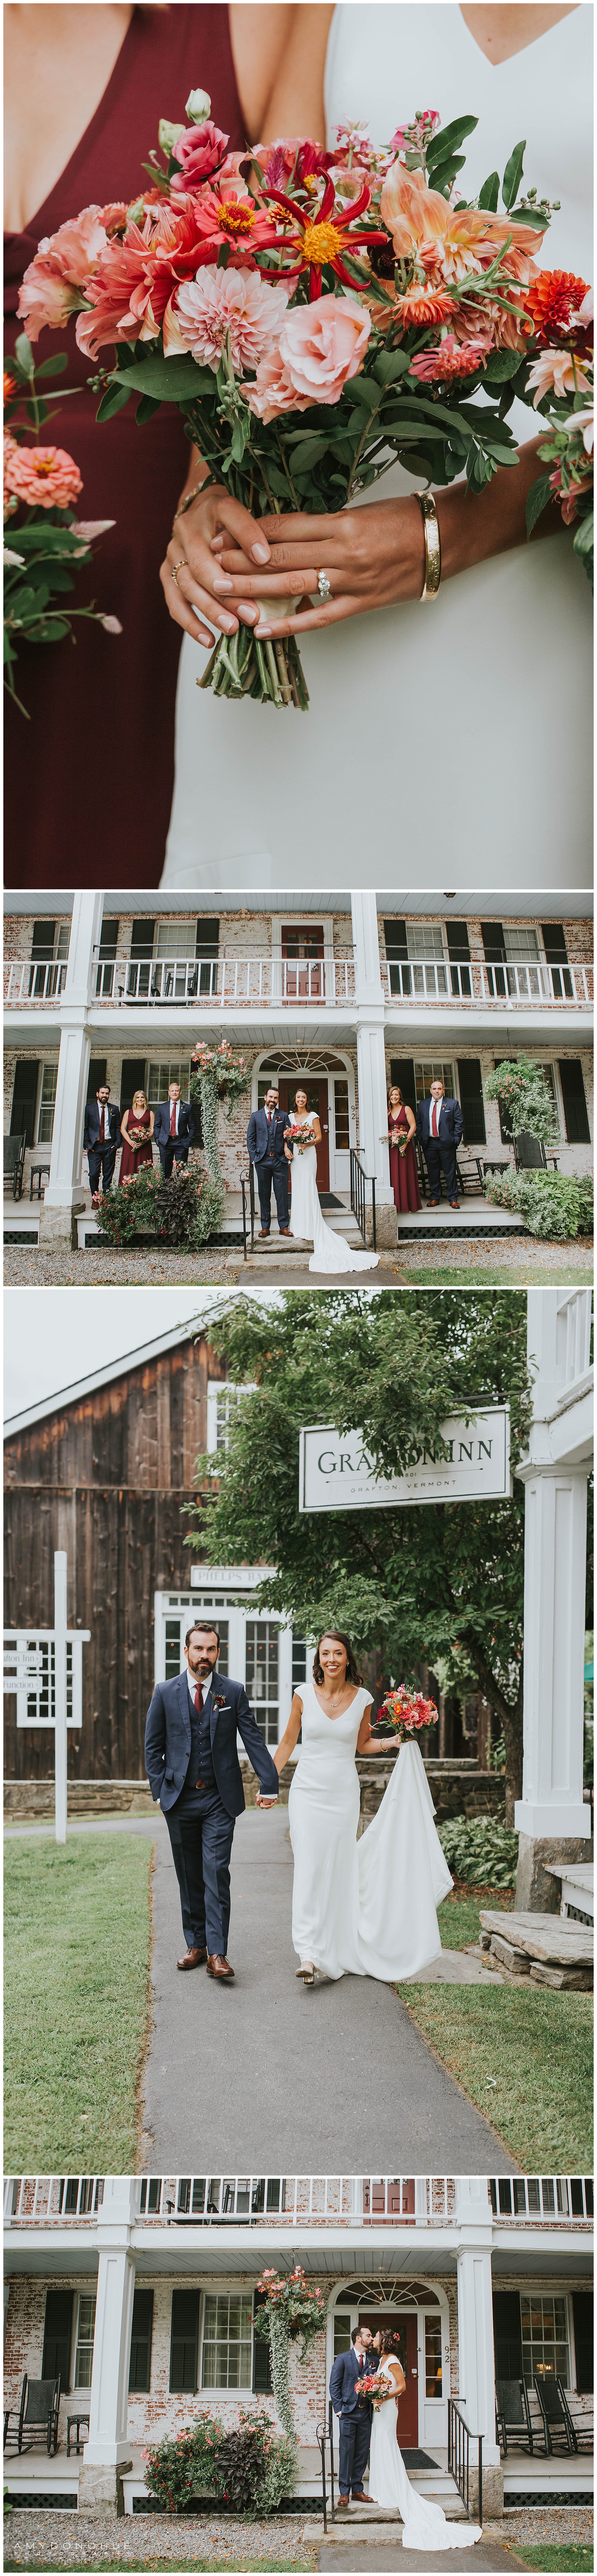 Bride and Groom Portraits | Grafton, Vermont Wedding Photographer | © Amy Donohue Photography